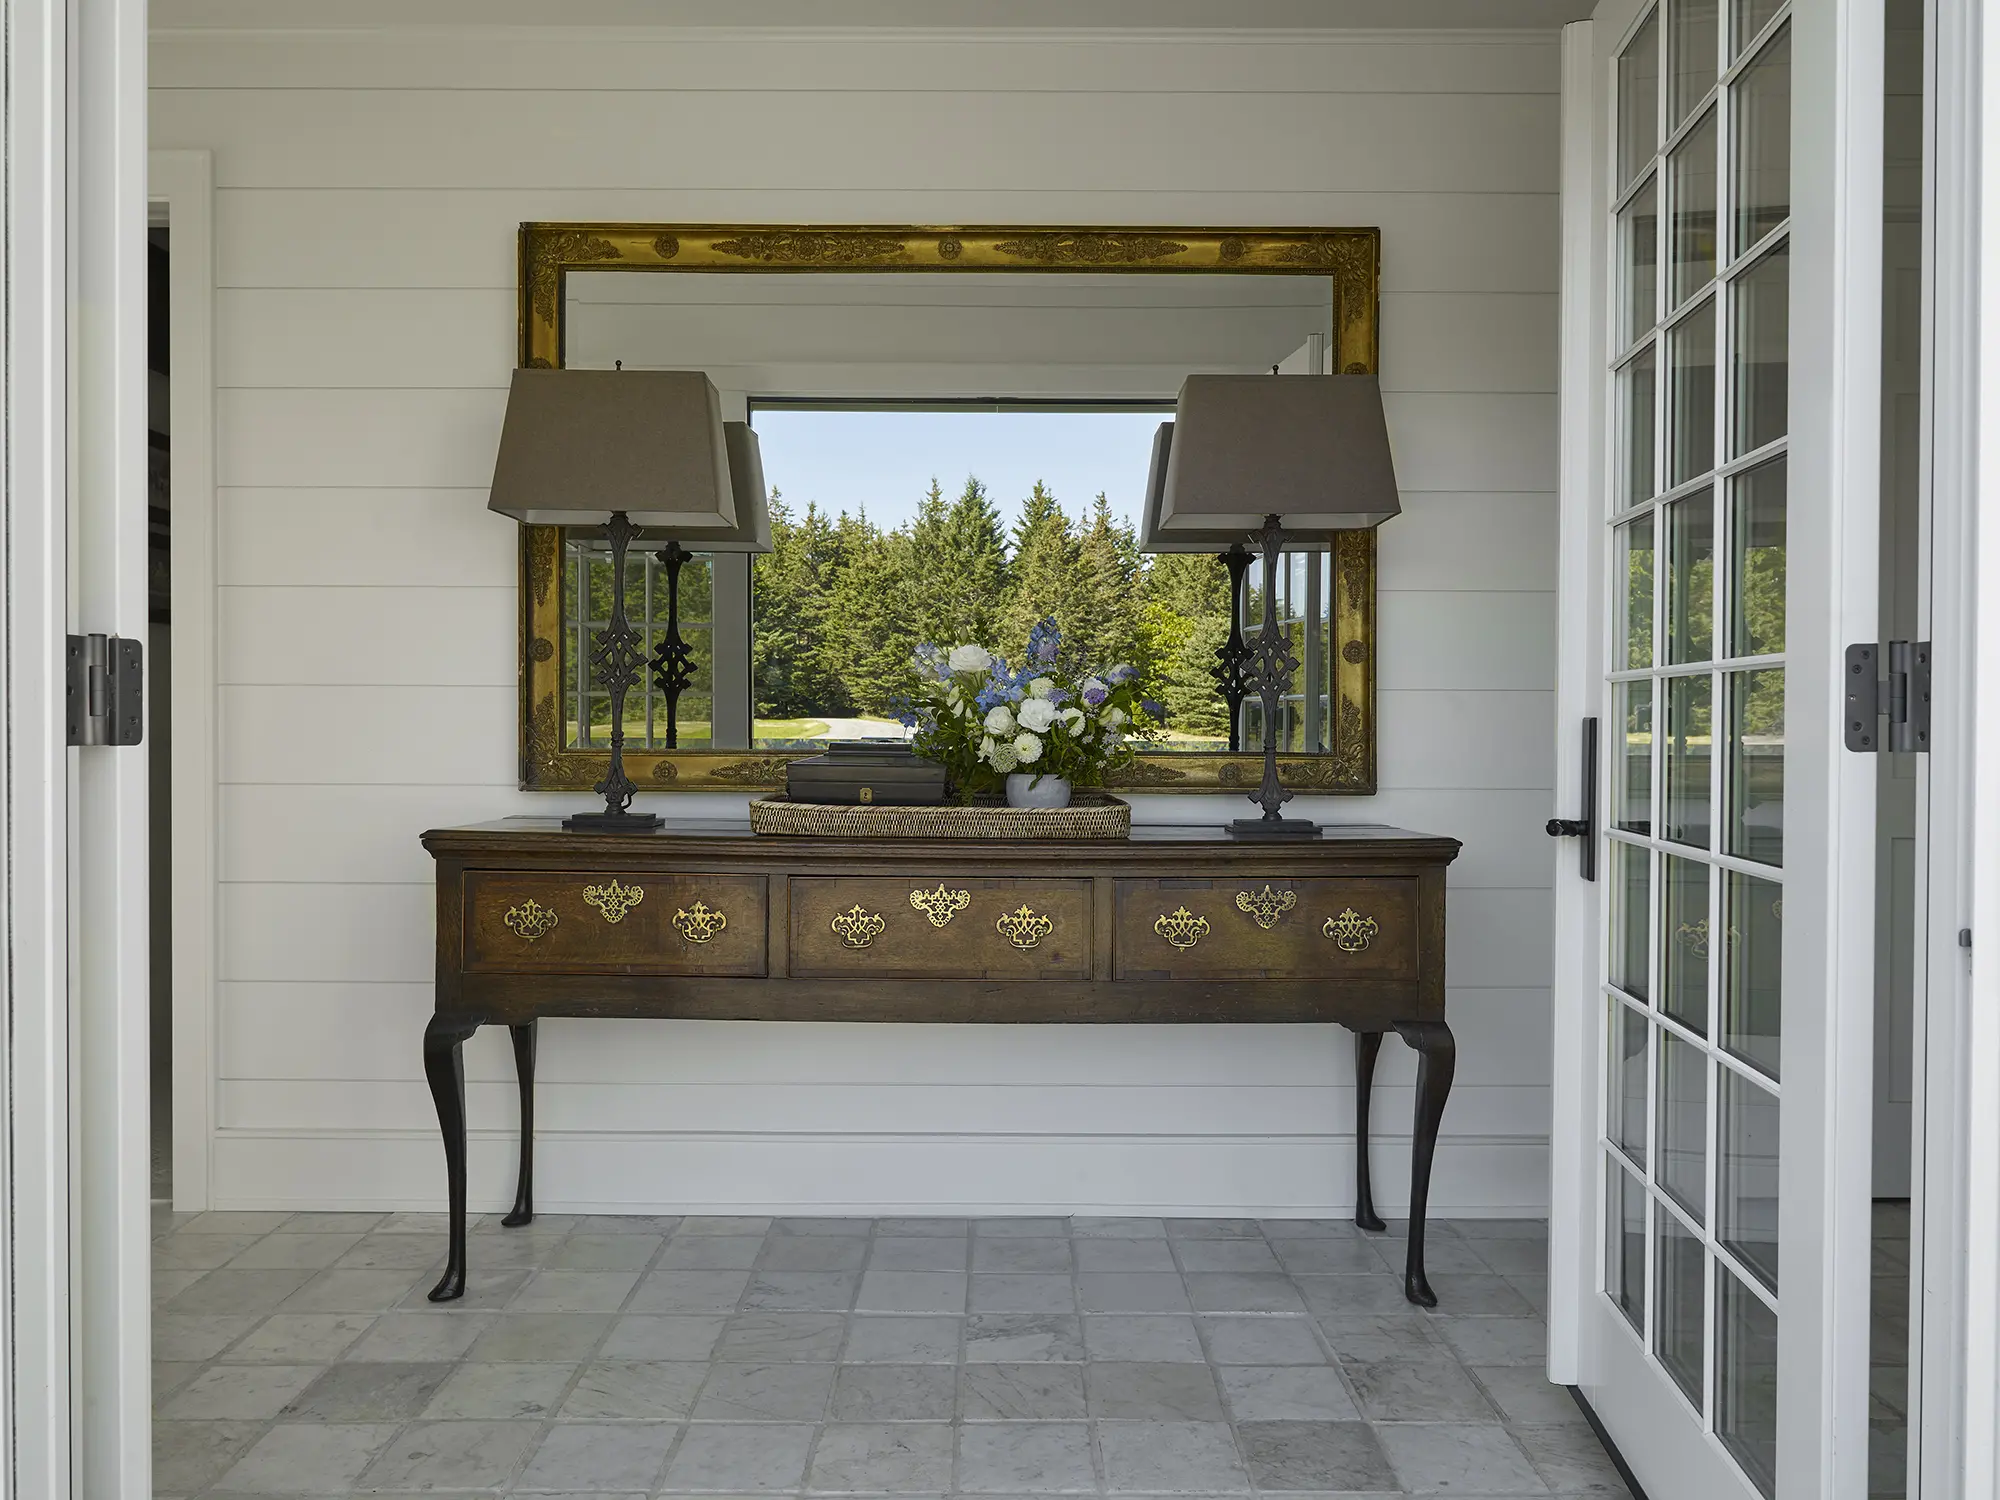 Entryway with large credenza and mirror reflecting the outdoors